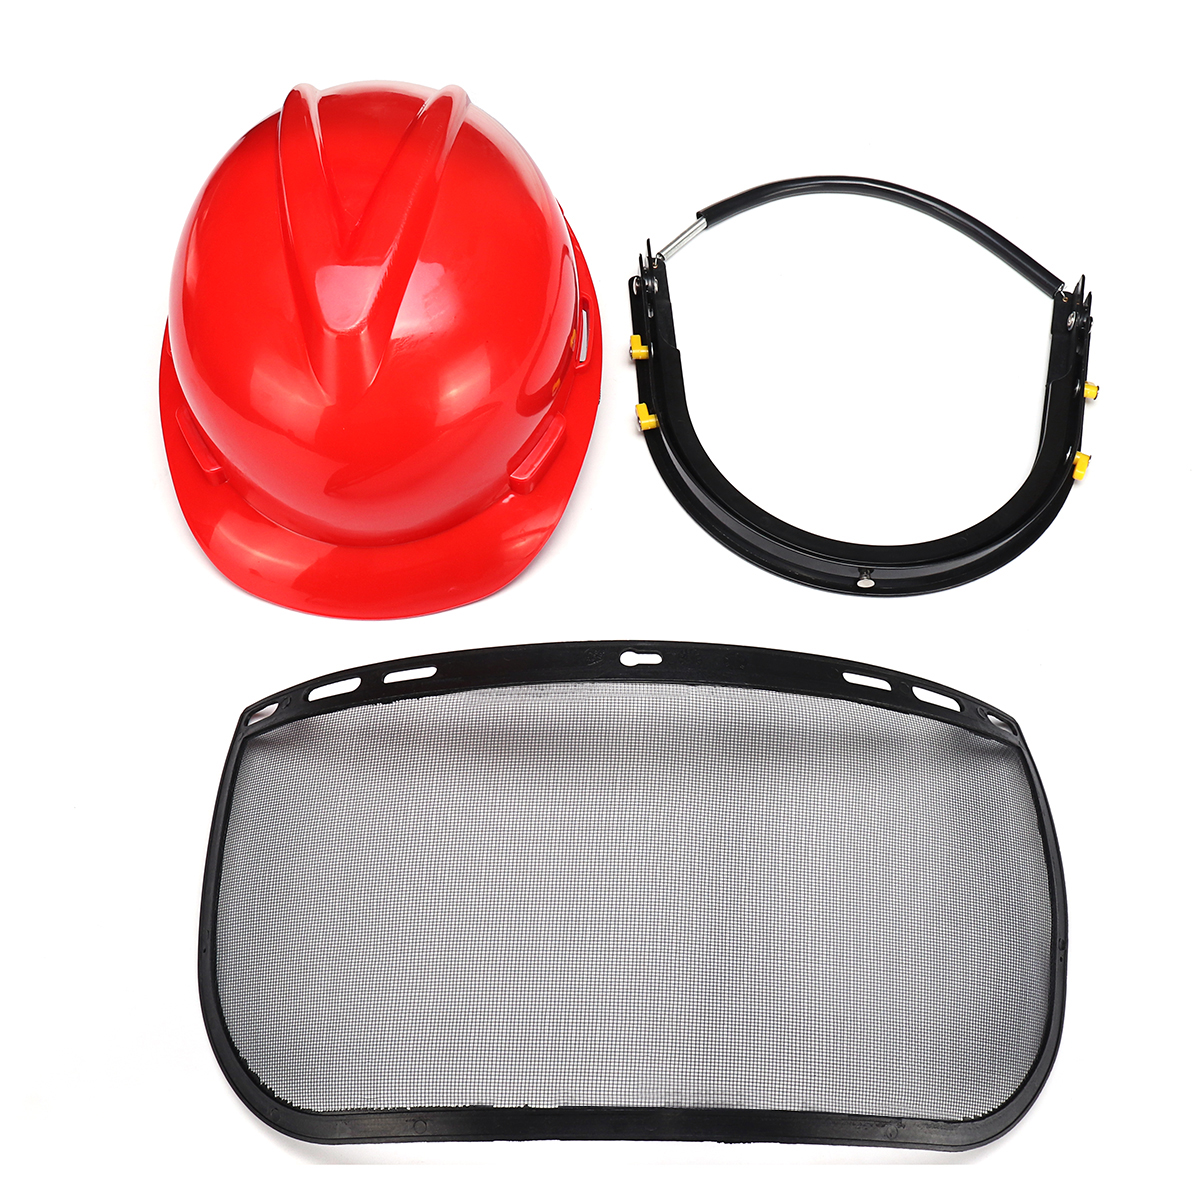 Red Safety Helmet Full Face Mask Chainsaw Brushcutte Mesh for Lawn Mower Trimmer Brush Cutter